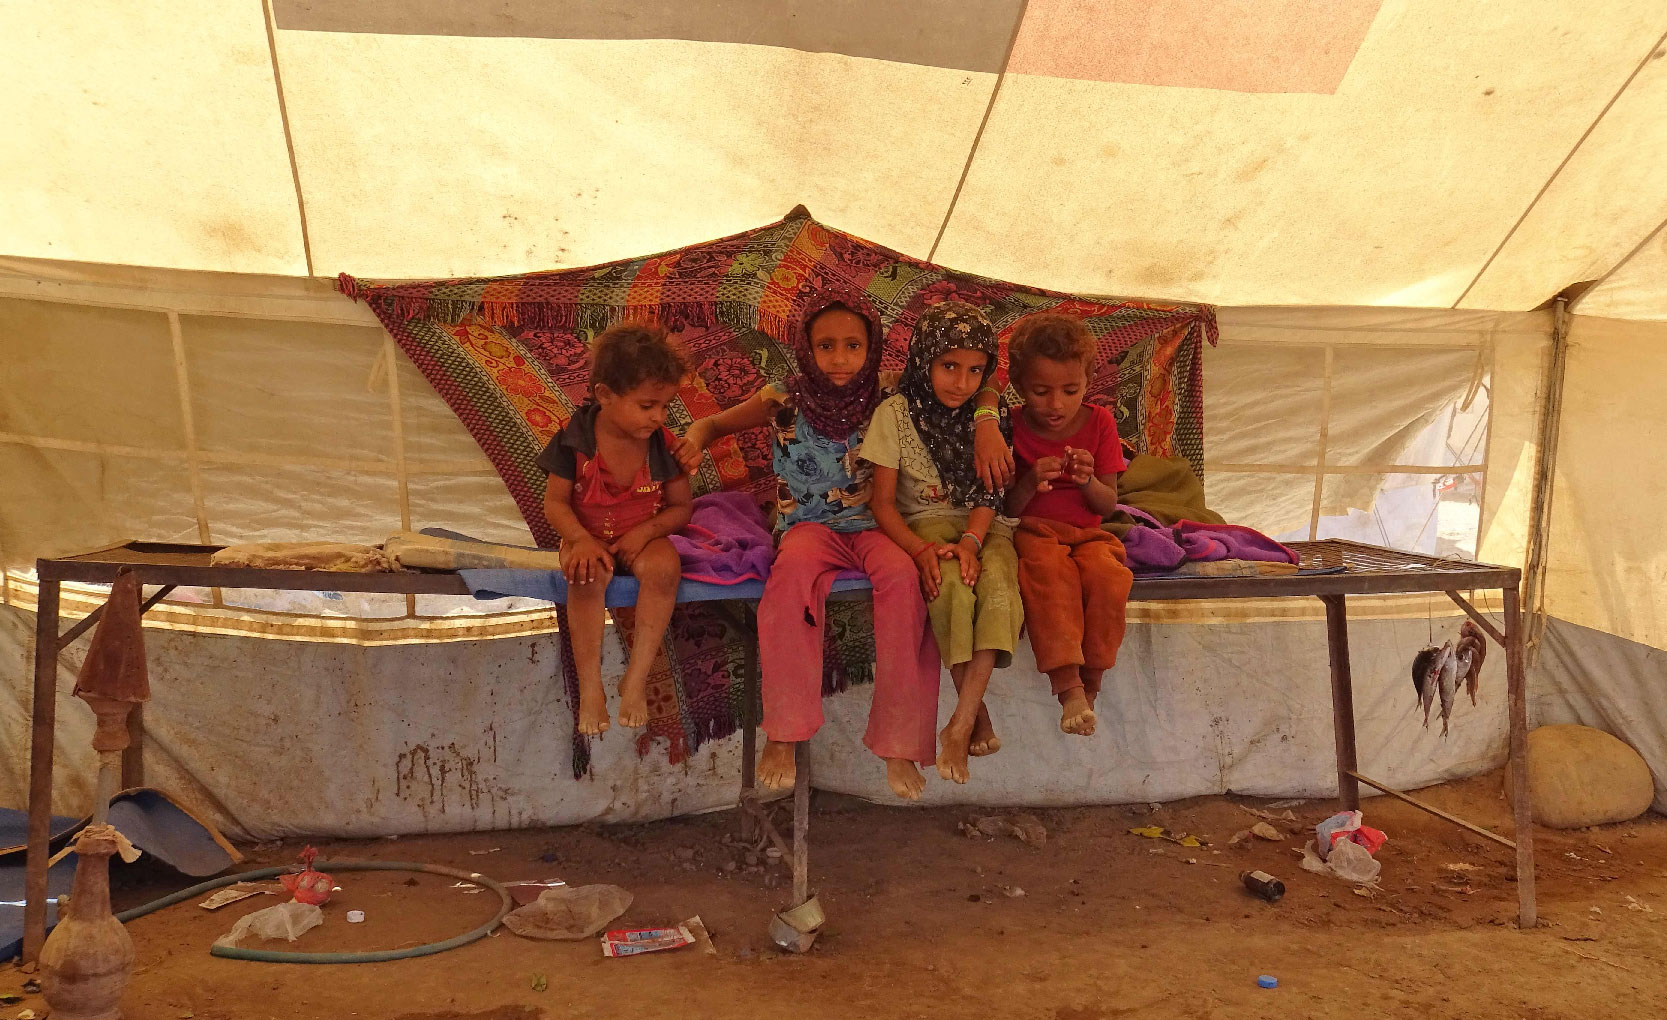 Yemeni children gather inside a tent at a camp for displaced people in the Khokha district of the western province of Hodeidah on December 12, 2018.